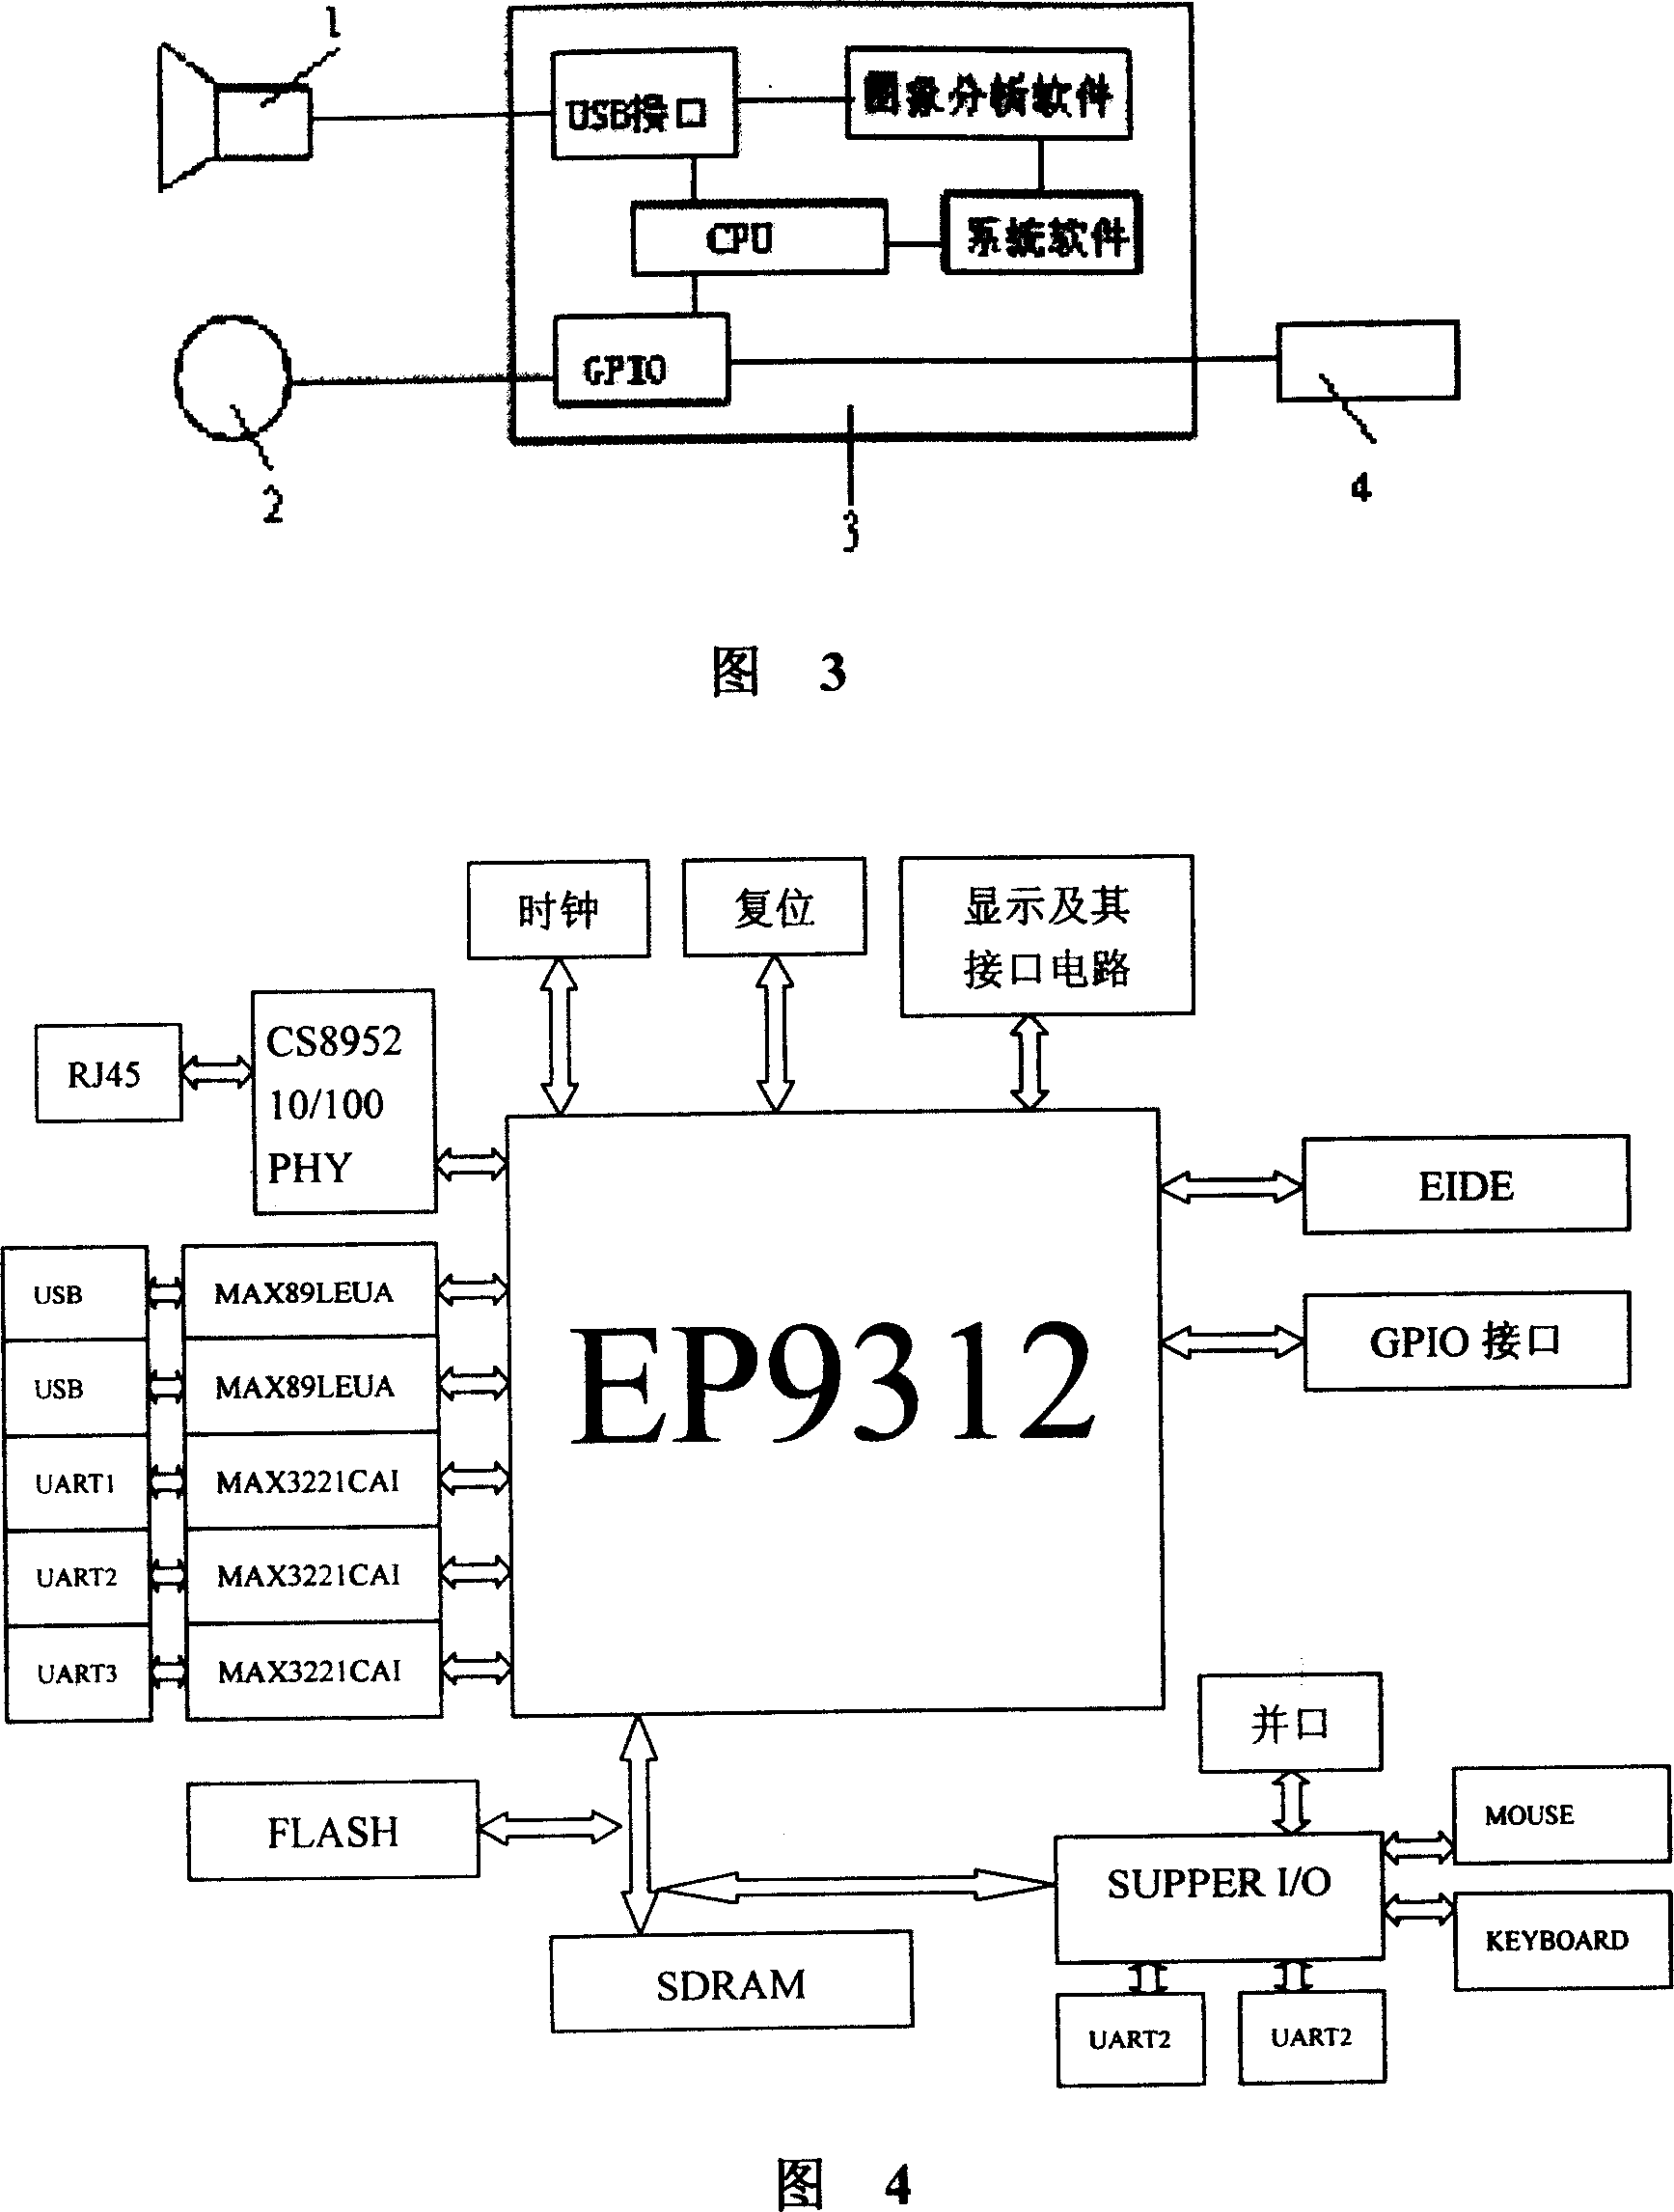 Driver fatigue monitoring system and method based on image process and information mixing technology